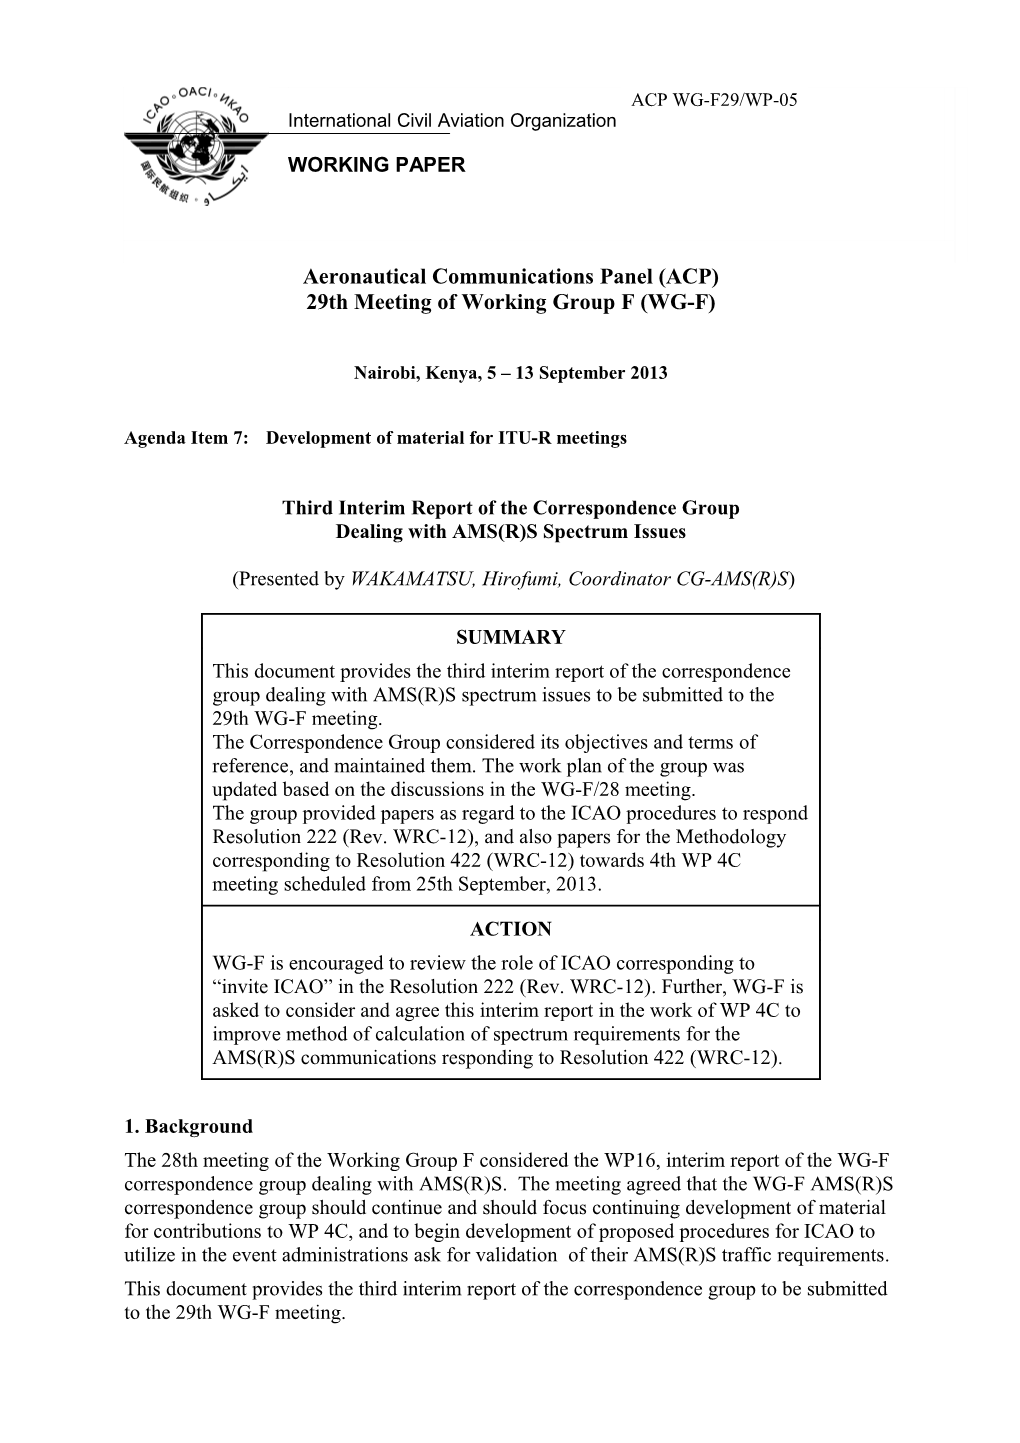 Third Interim Report of the Correspondence Group Dealing with AMS(R)S Spectrum Issues